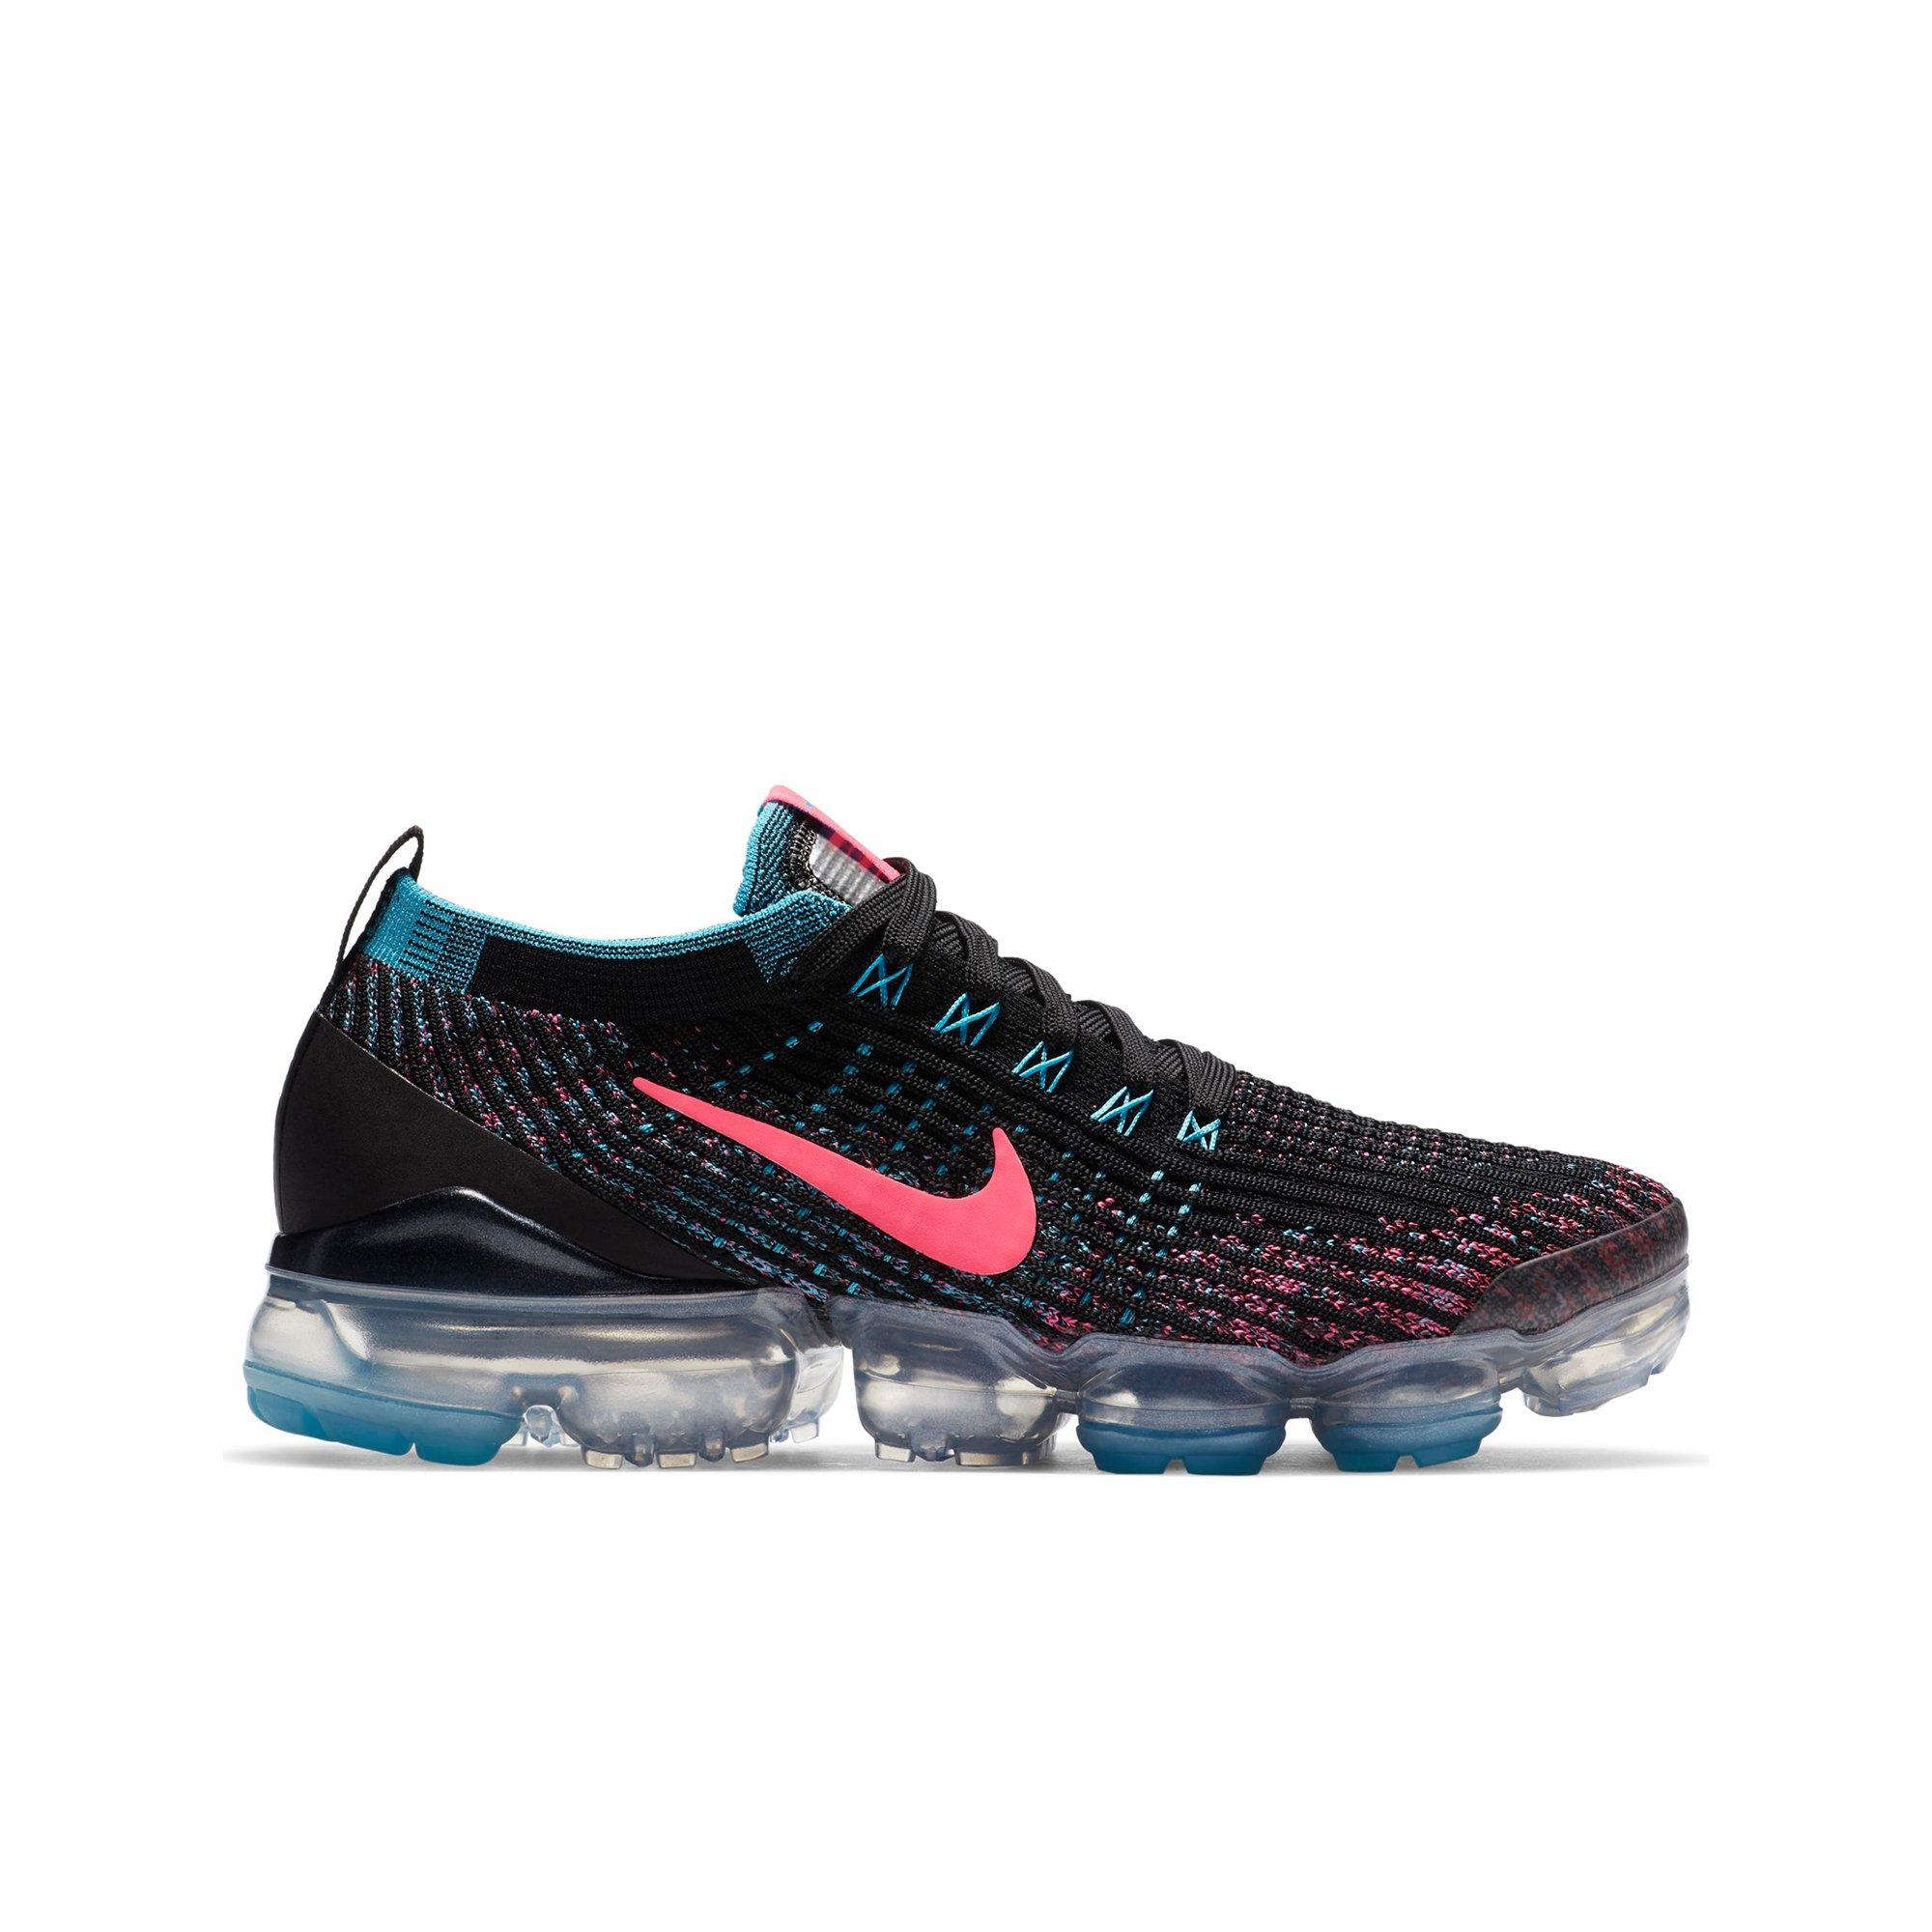 womens vapormax pink and blue